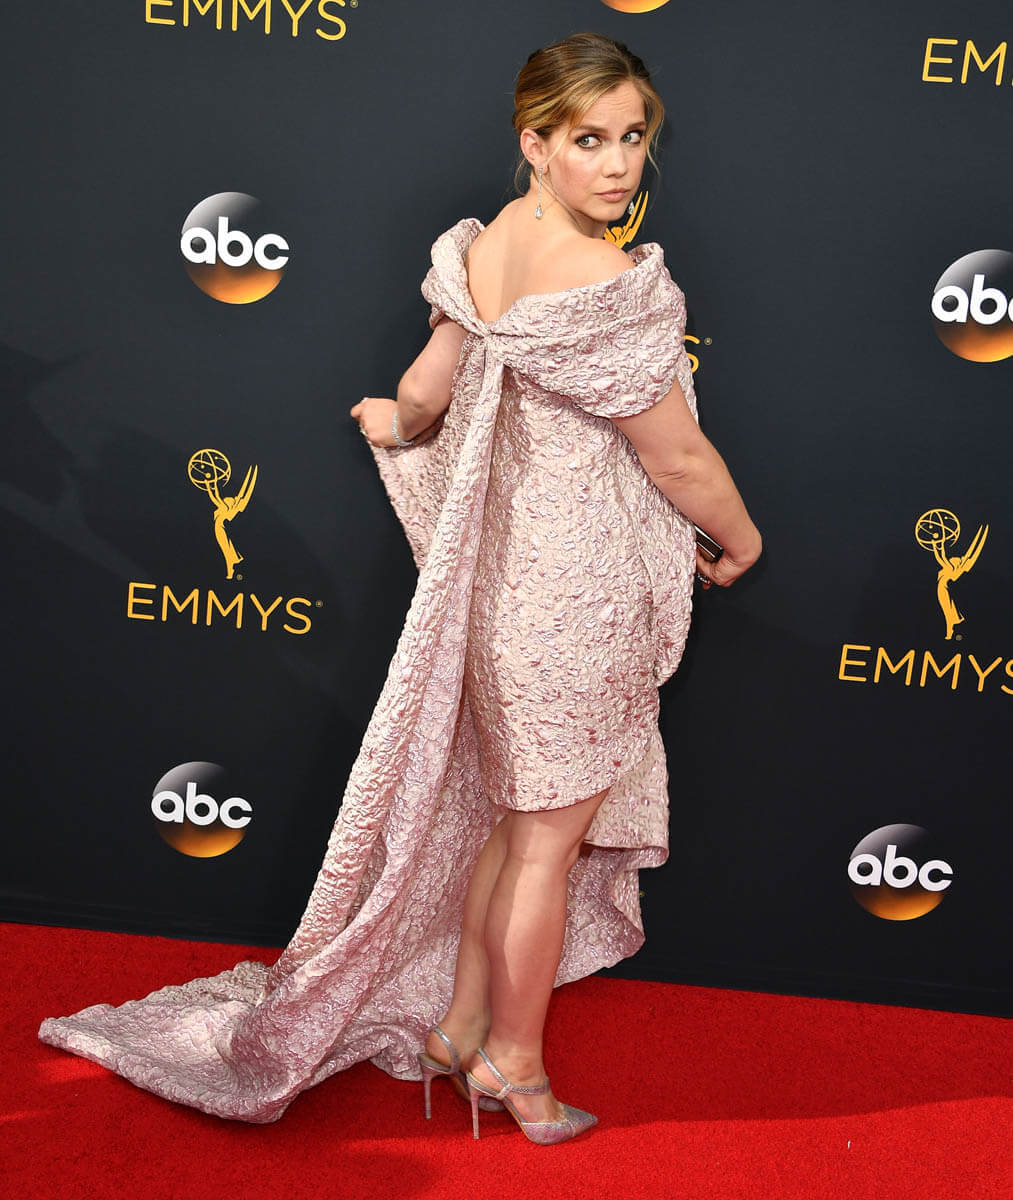 Anna Chlumsky In A Daring Cape Dress At The 2016 Emmy Awards